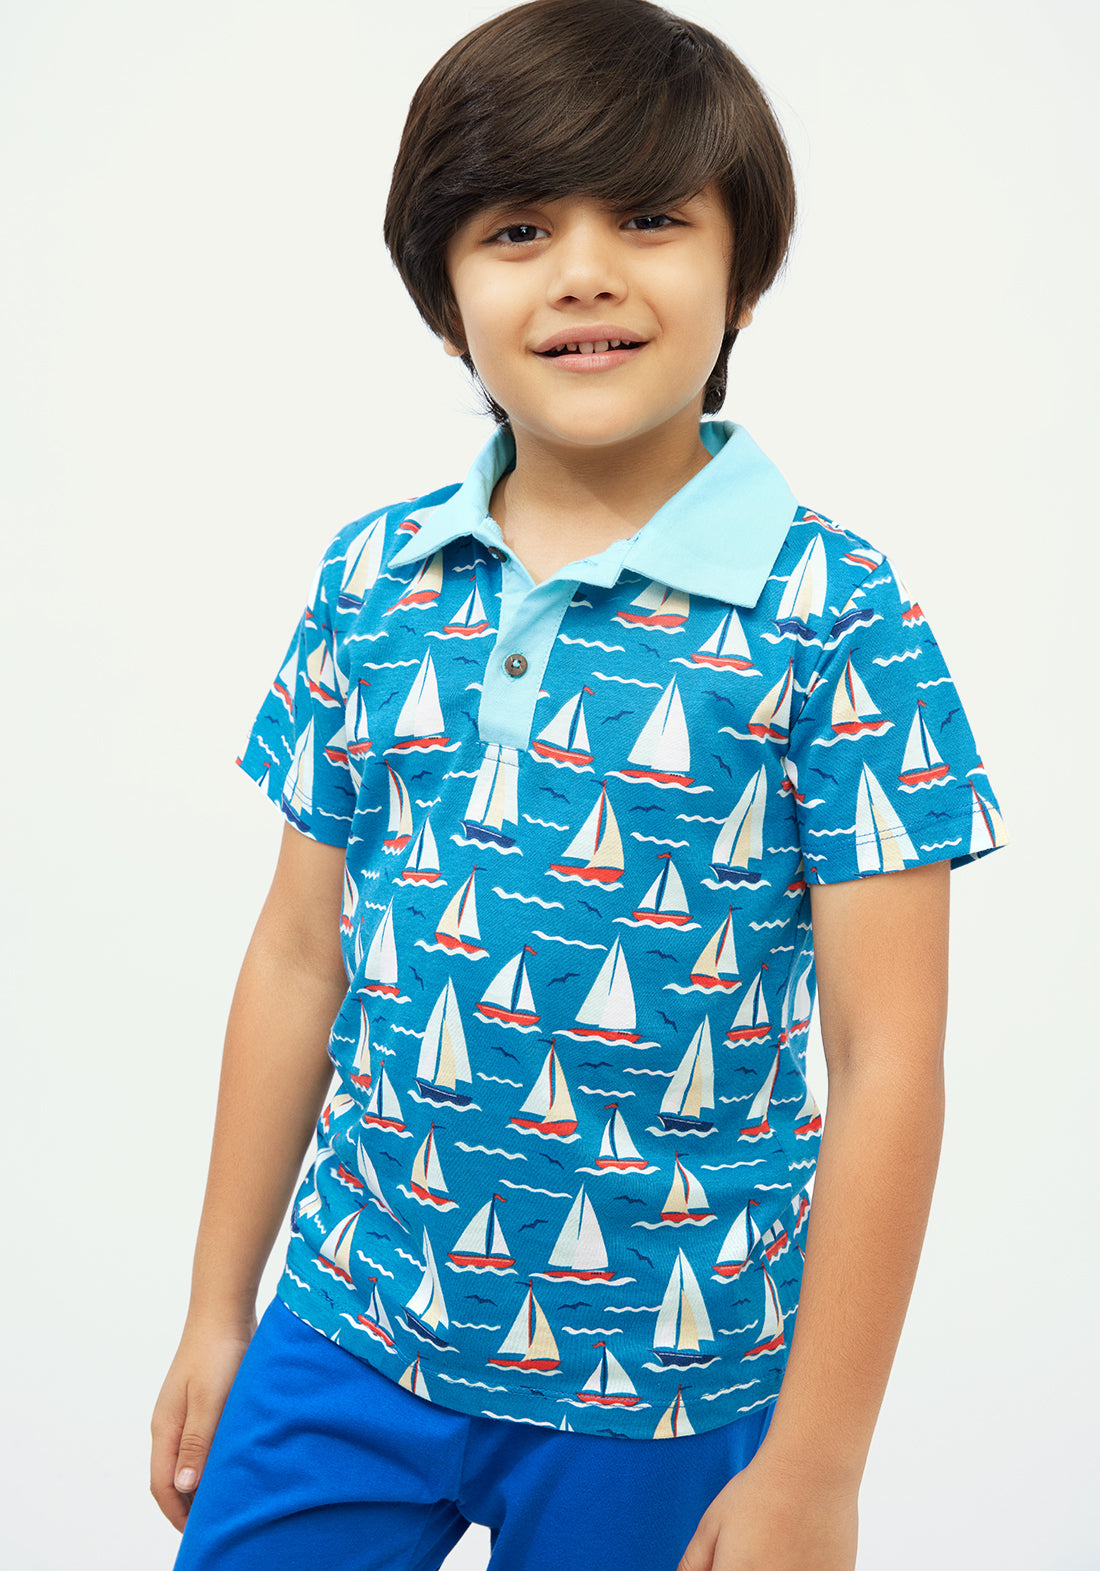 RED, BLUE AND WHITE BOAT PRINT POLO T-SHIRT